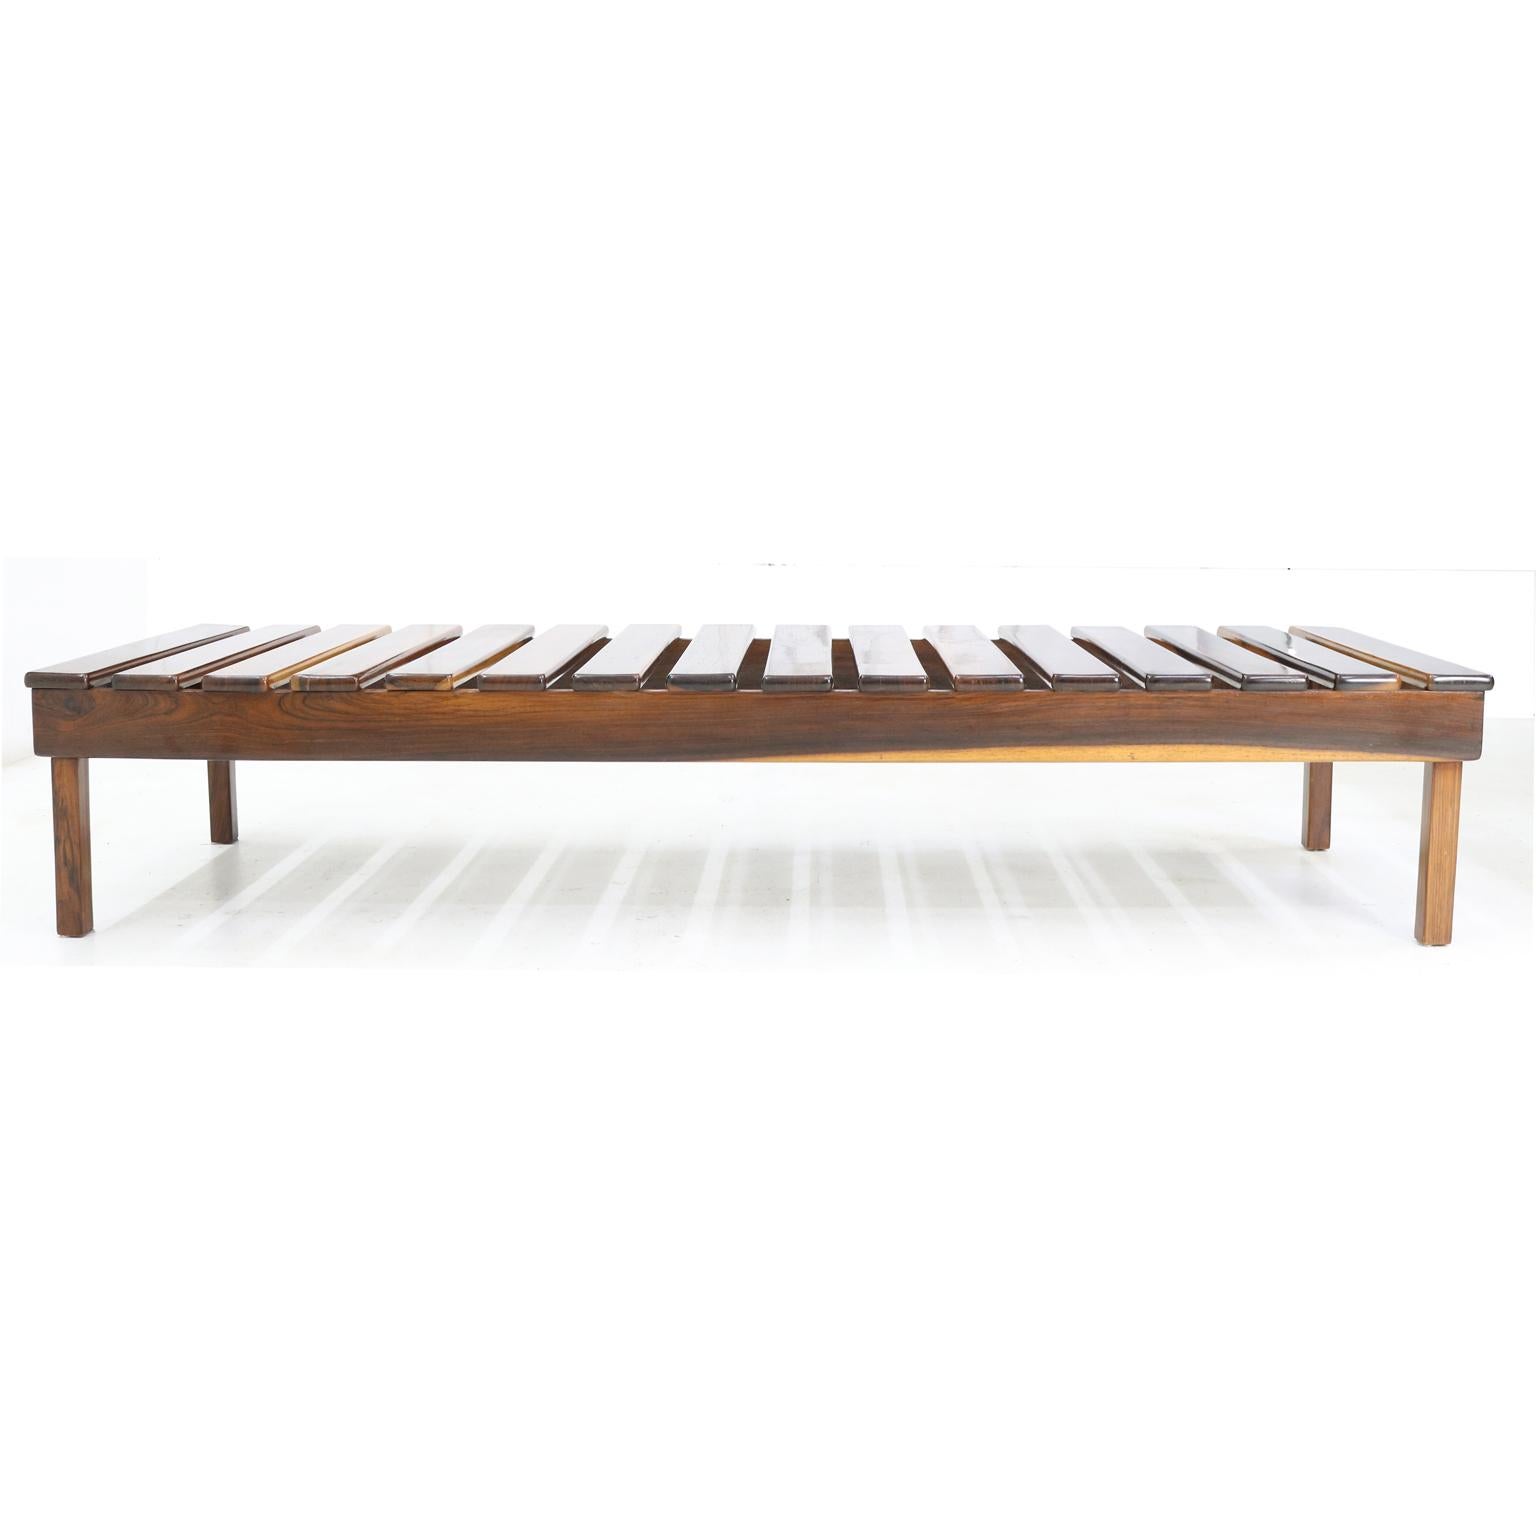 Midcentury bench in jacaranda by Ernesto Hauner for Mobilinea manufacturer
Brazil, 1960s

about Ernesto Hauner
Mr. Hauner emigrated to Brazil in 1948, together with his brother Carlo Hauner. In Italy he studied technical design. In São Paulo,